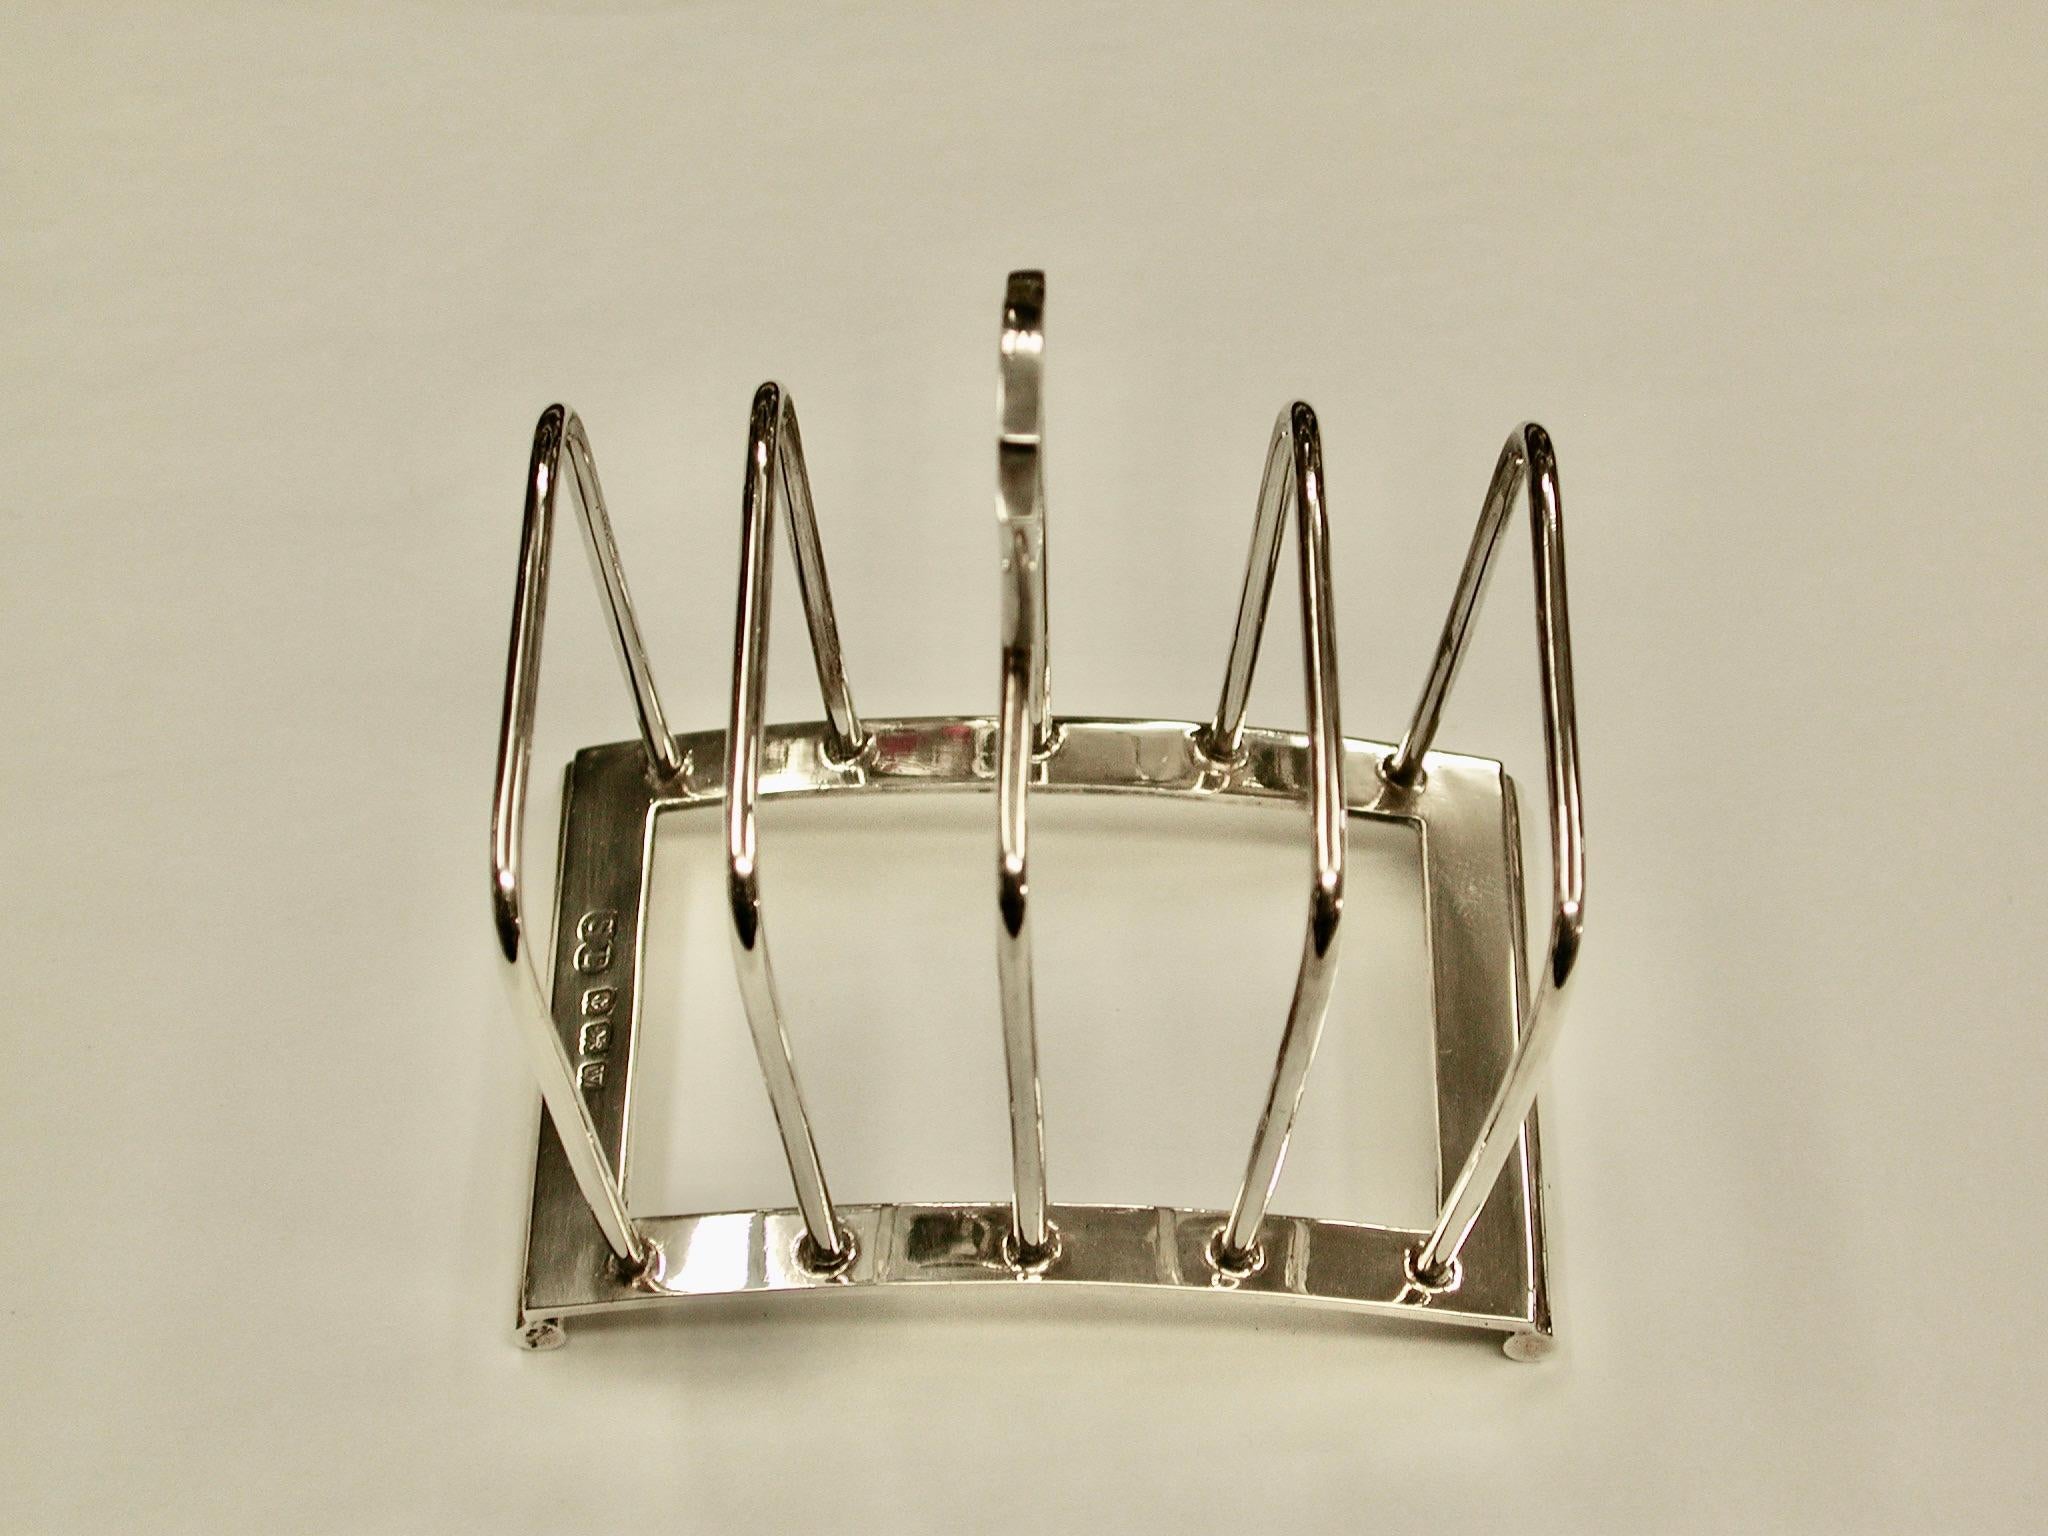 Pair of Art Deco silver toast racks, dated 1941/46, Suckling Bros, Birmingham
Sturdy heavy quality pair of toastracks with fanned out formation on the racks.
Weight :- 6.72 troy ounces the pair.